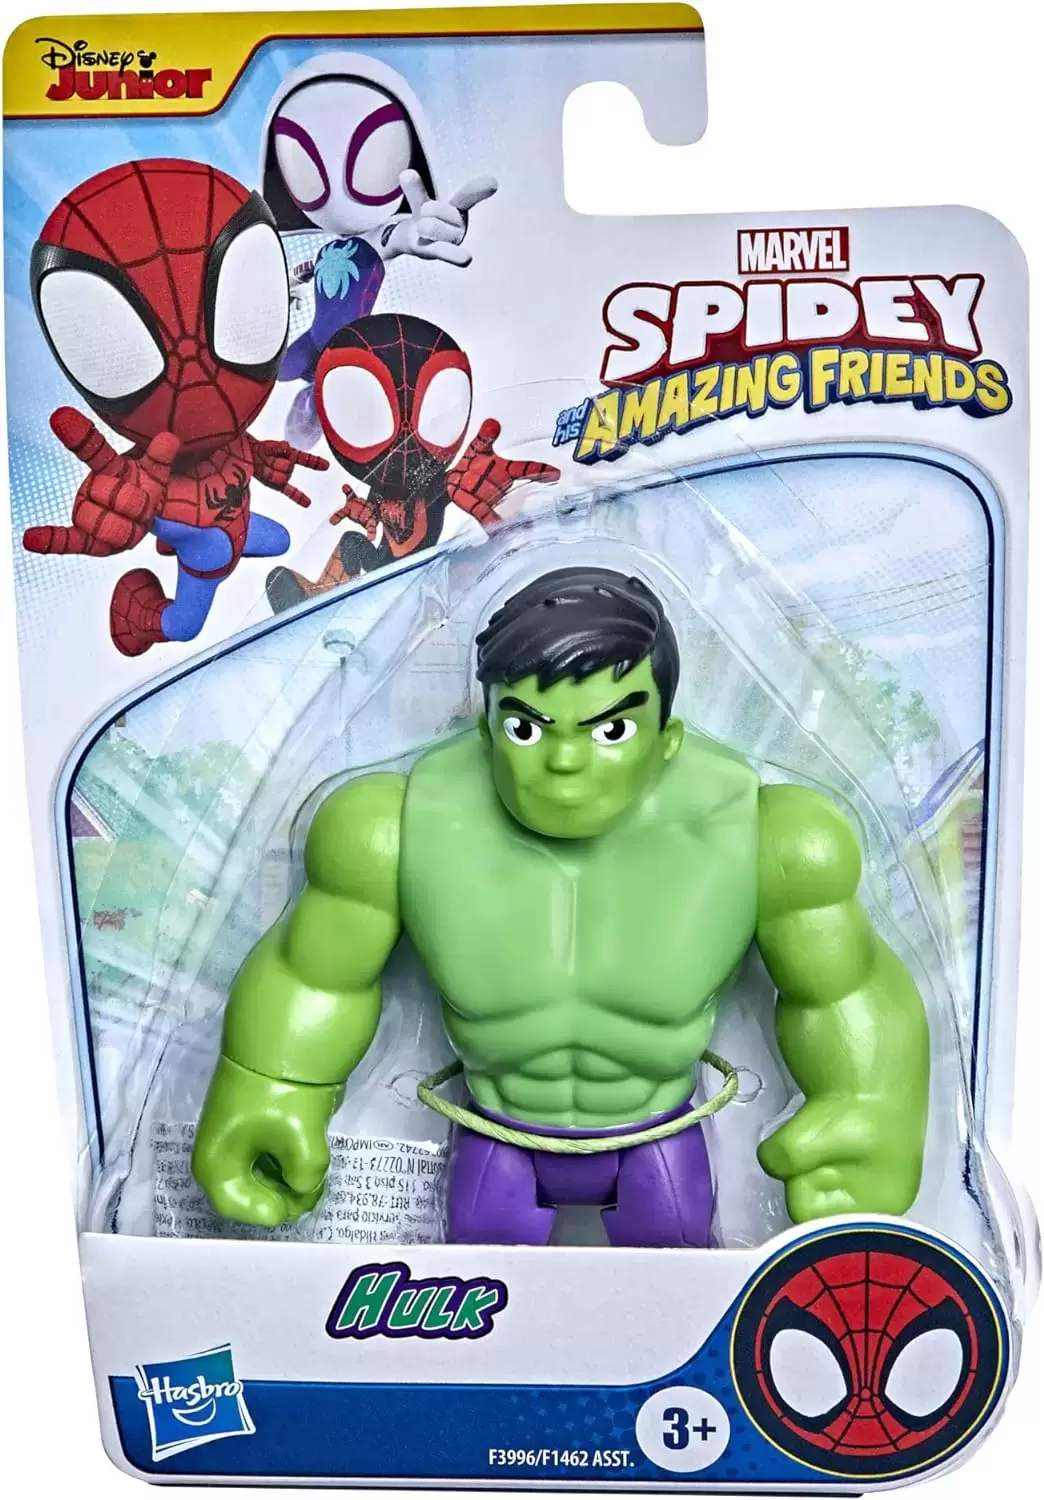 Spidey And His Amazing Friends - Hulk